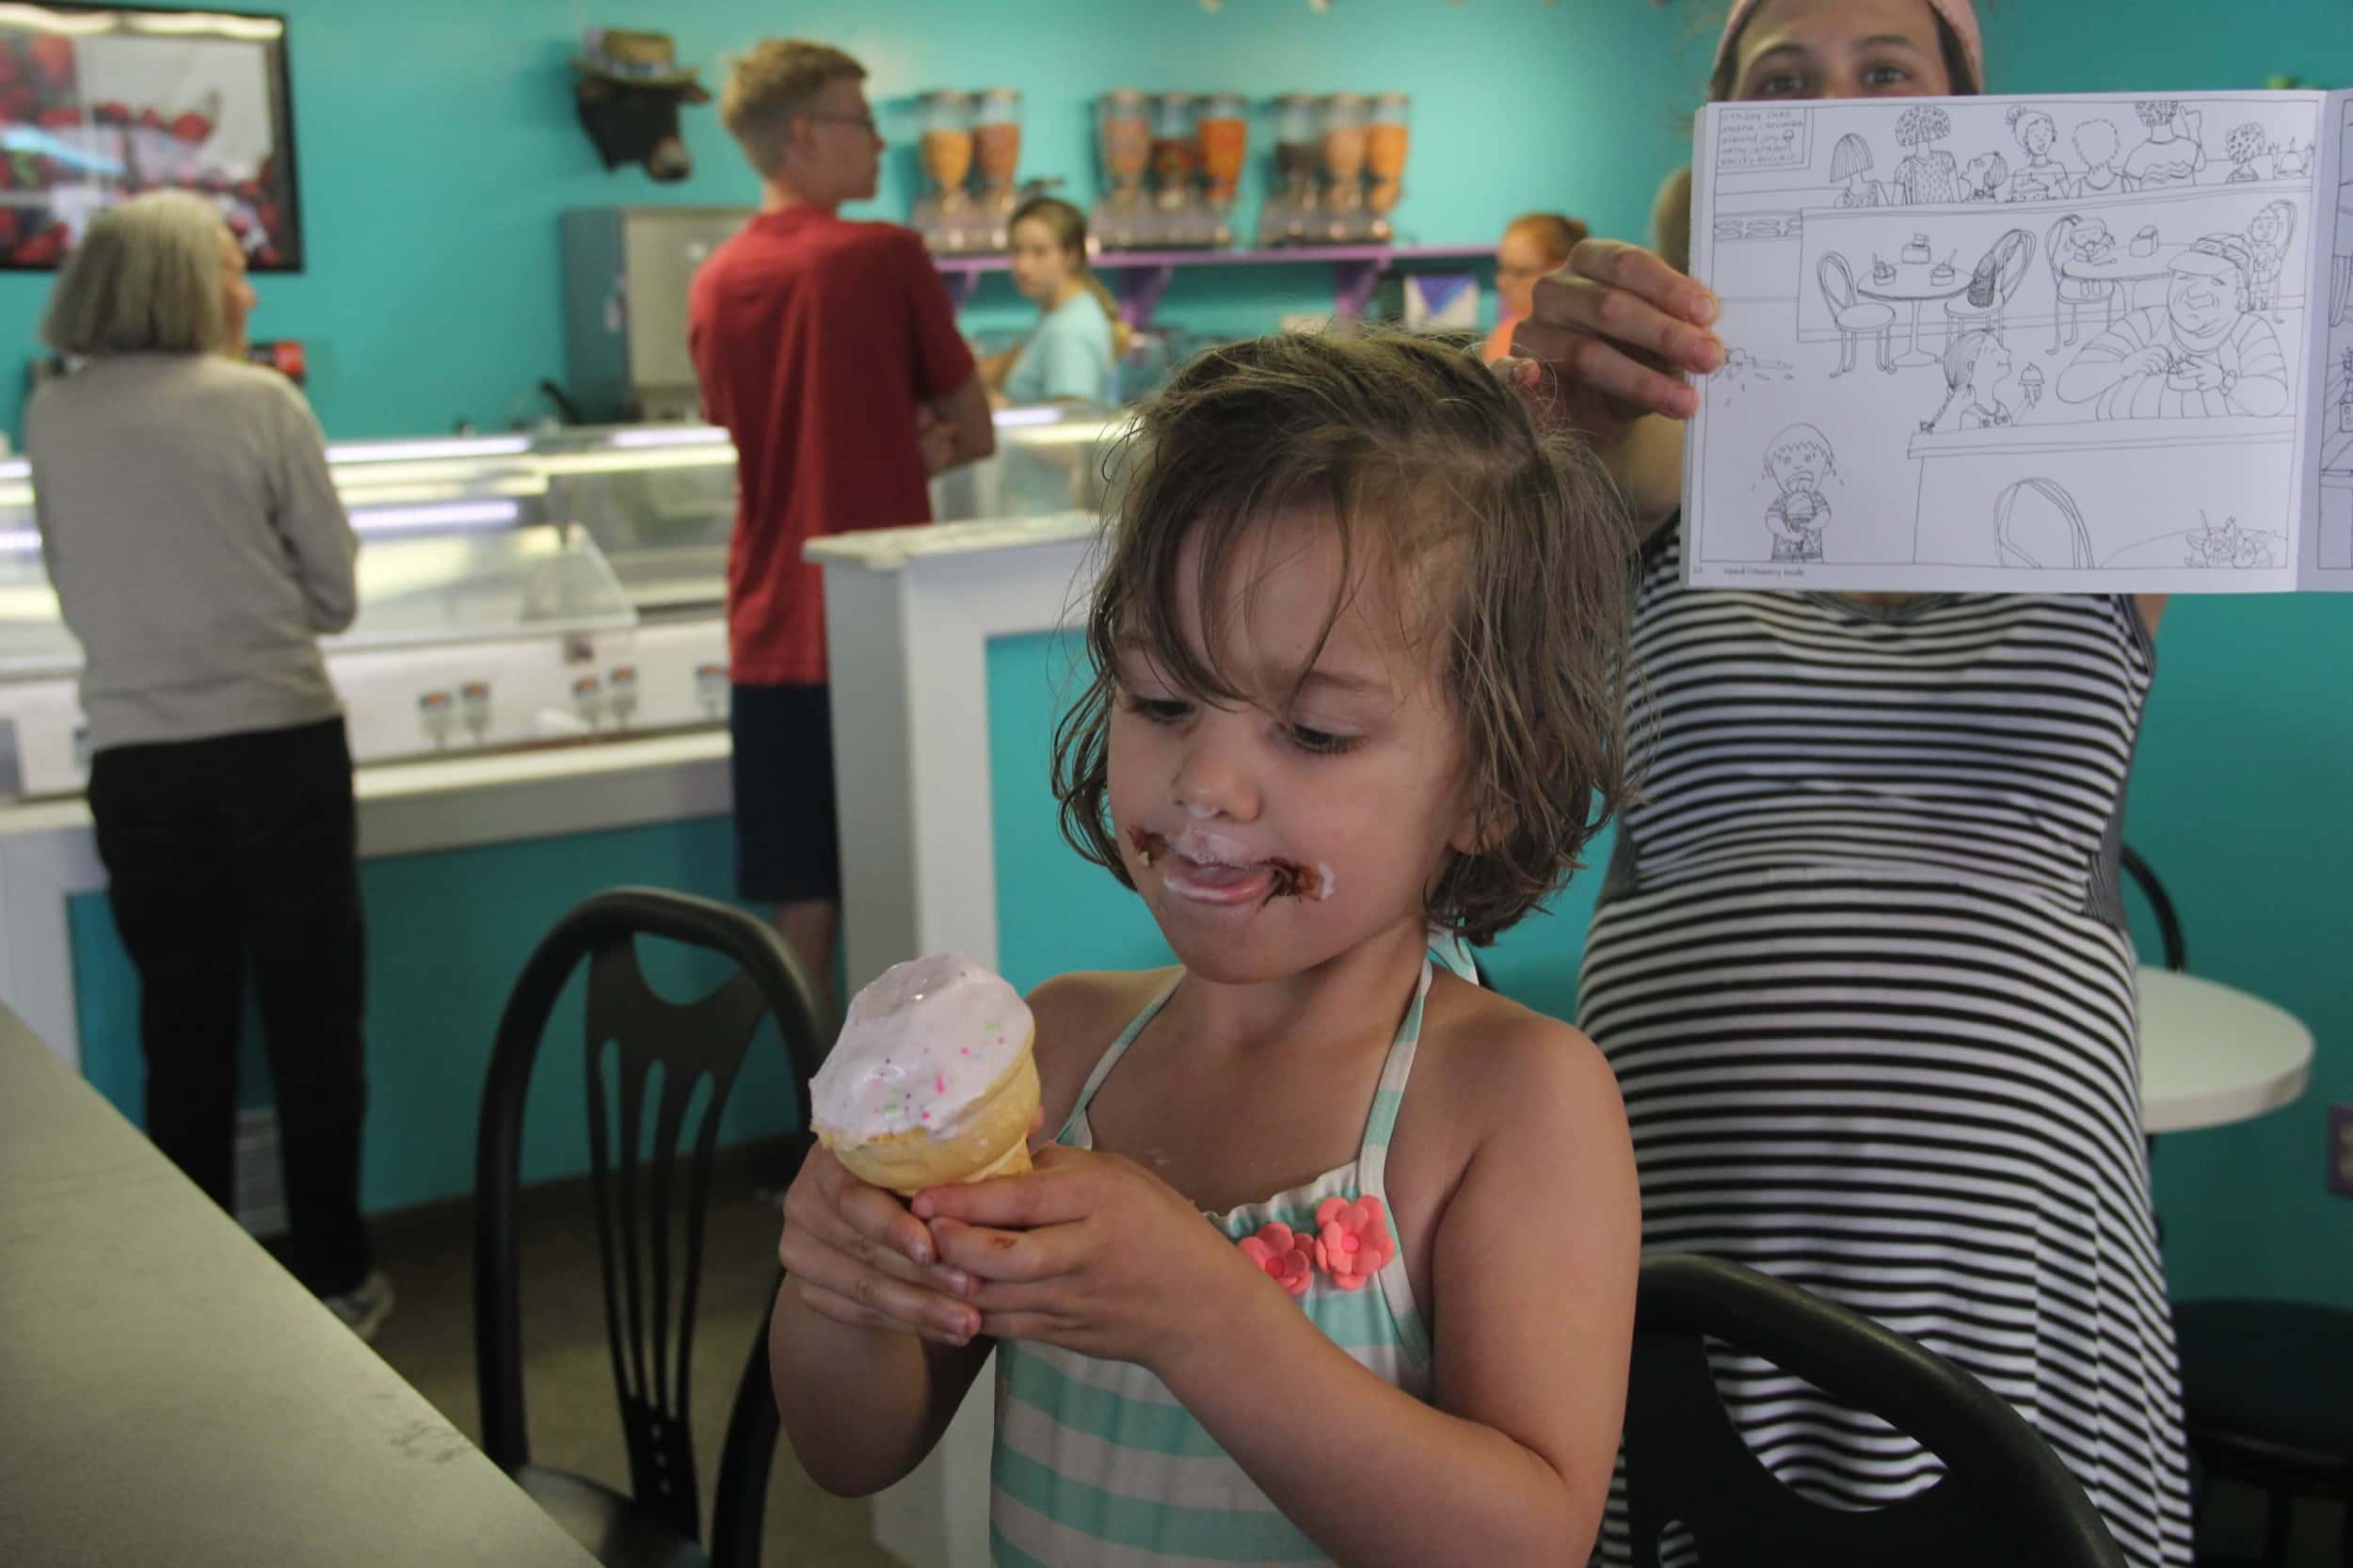 Our middle kiddo enjoys her ice cream cone inside the Island Creamery, while Joanna holds up the "Inside the Creamery" page of her book.